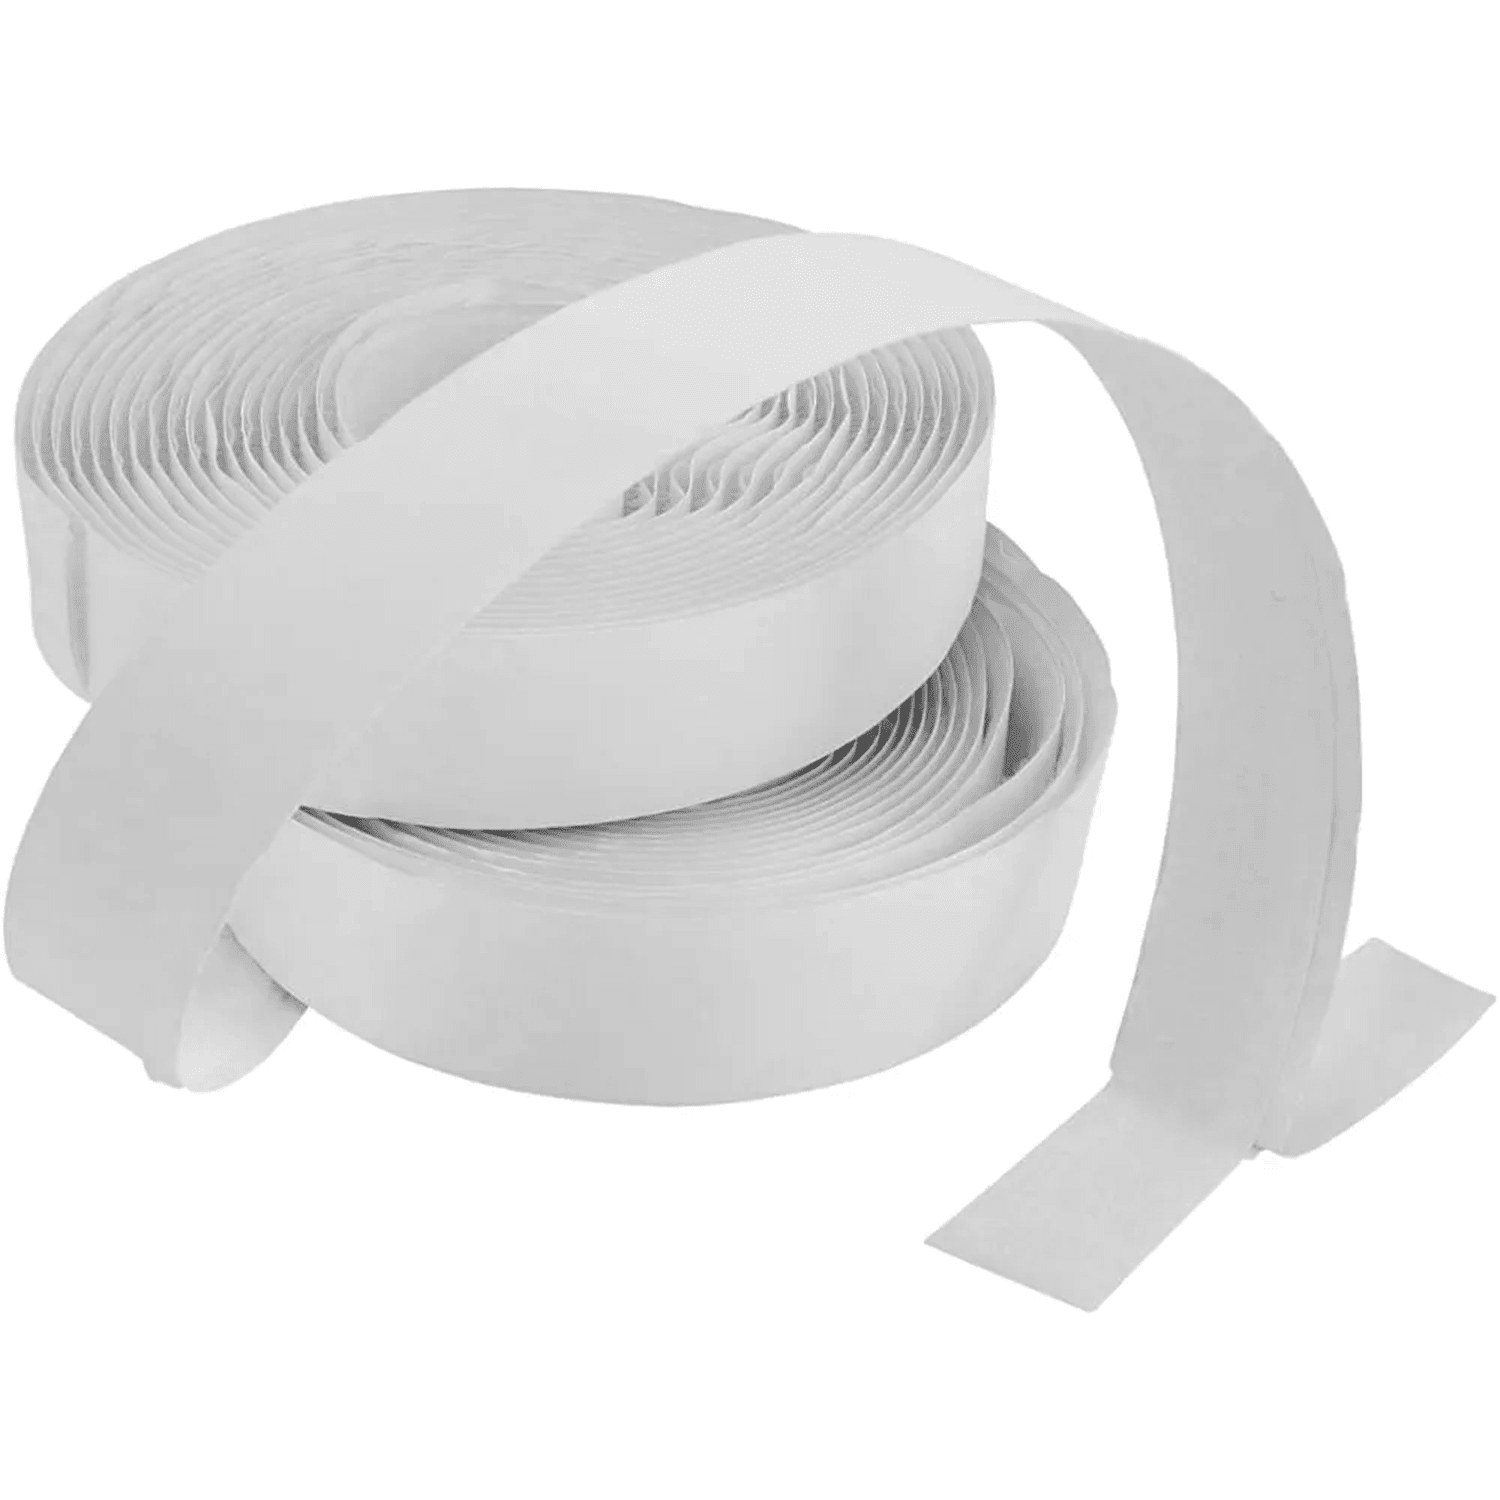 LLPT Hook and Loop Tape Color White 1 inch x 23 Feet Each Roll Heavy Duty Adhesive Hook Loop Strip Mounting Tape for Indoor and Outdoor (HTW130)